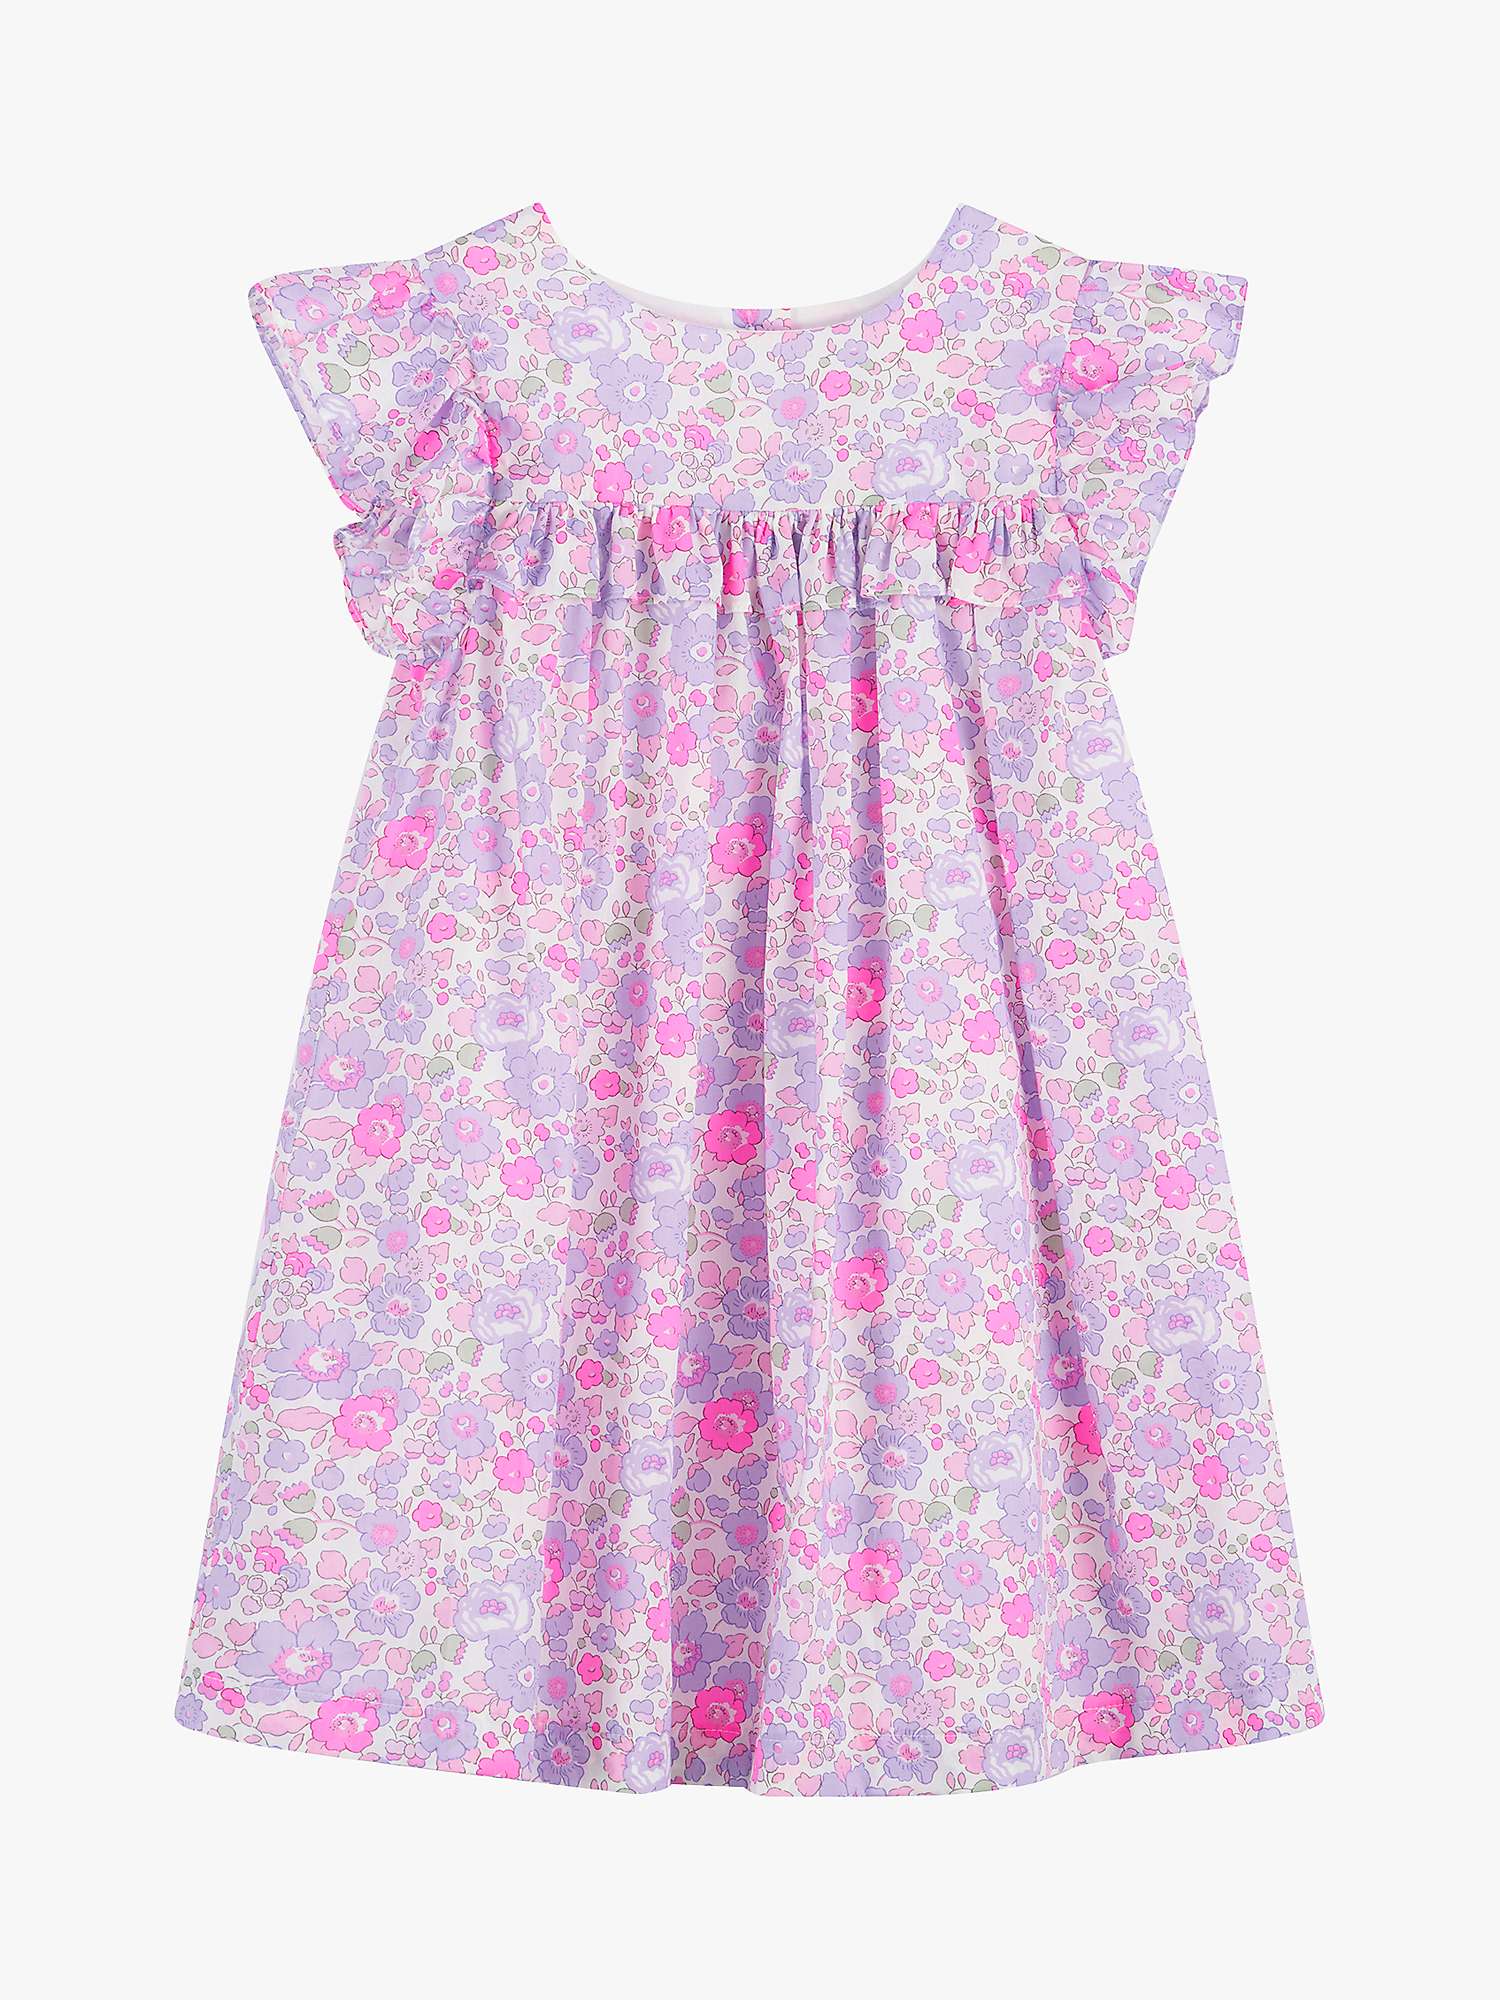 Buy Trotters Kids' Betsy Liberty Floral Dress, Lilac Betsy Online at johnlewis.com